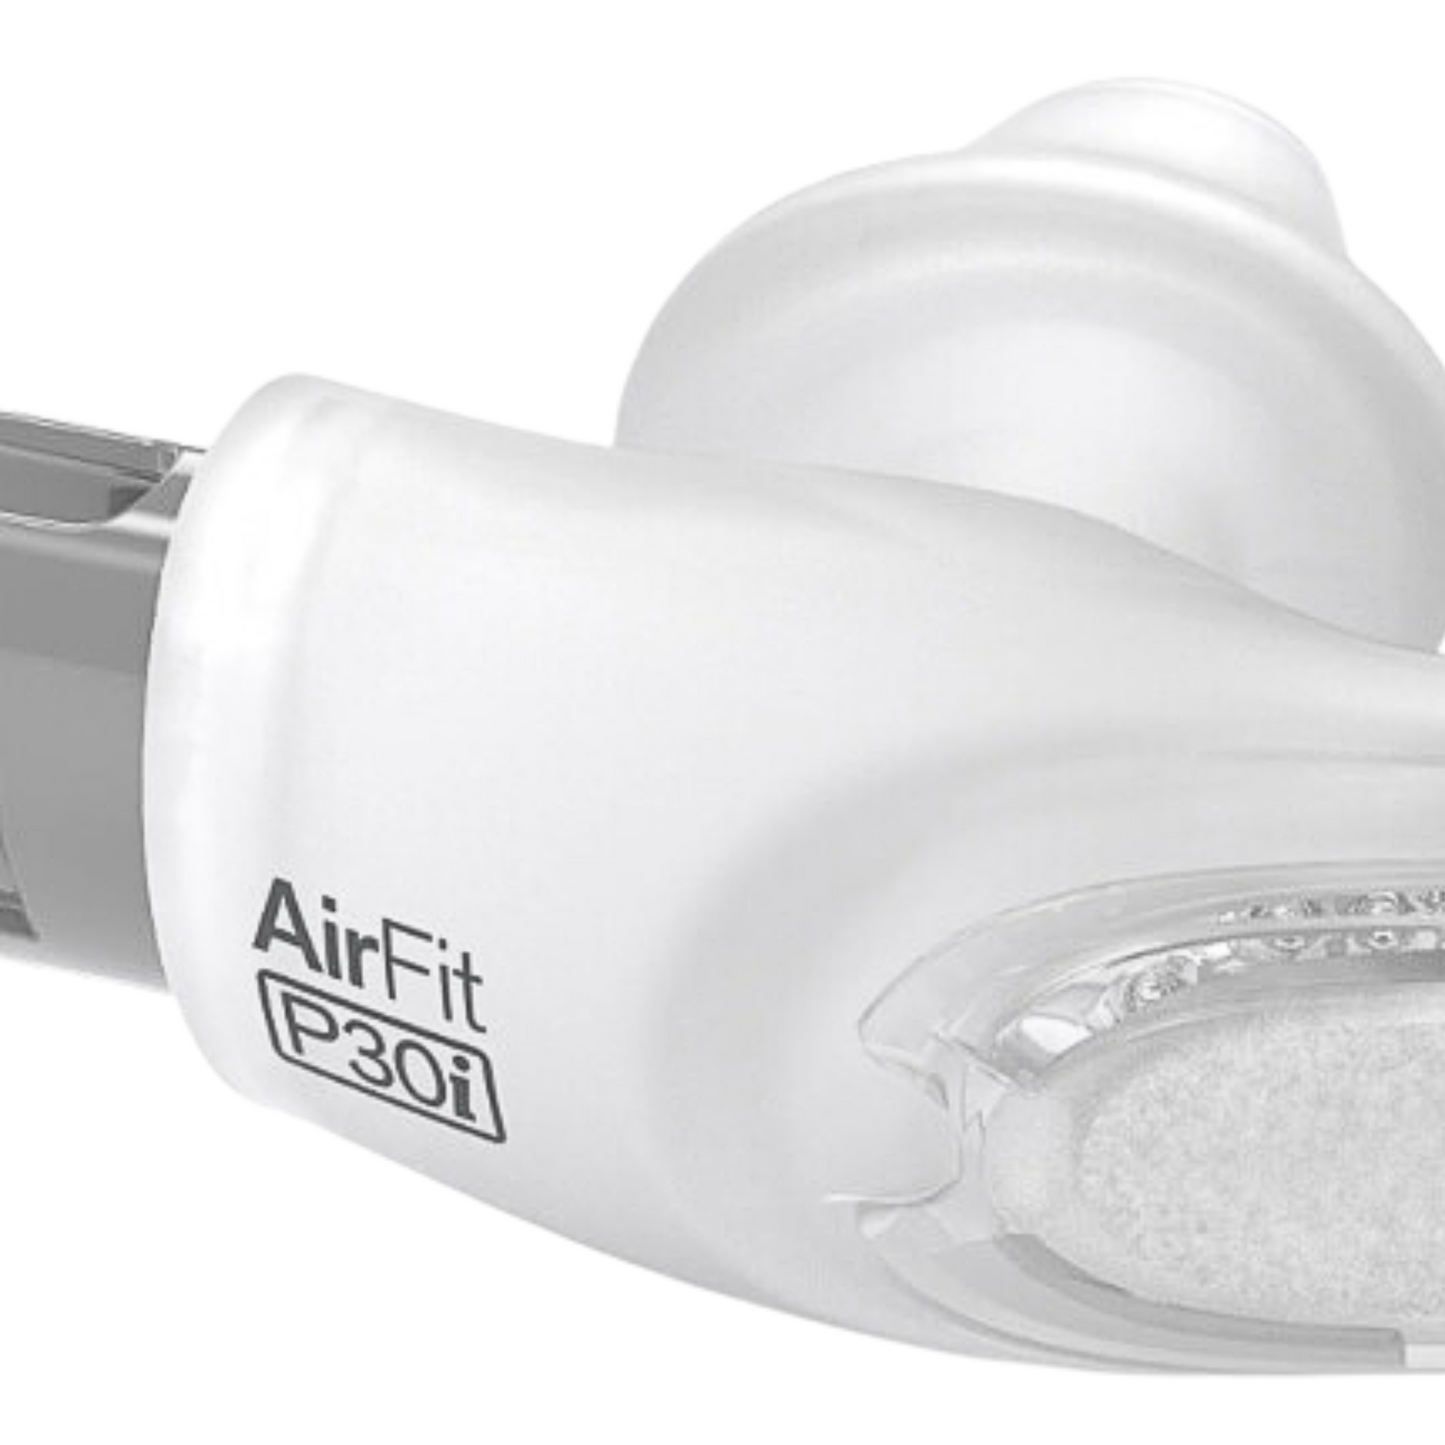 ResMed AirFit P30i Cushion